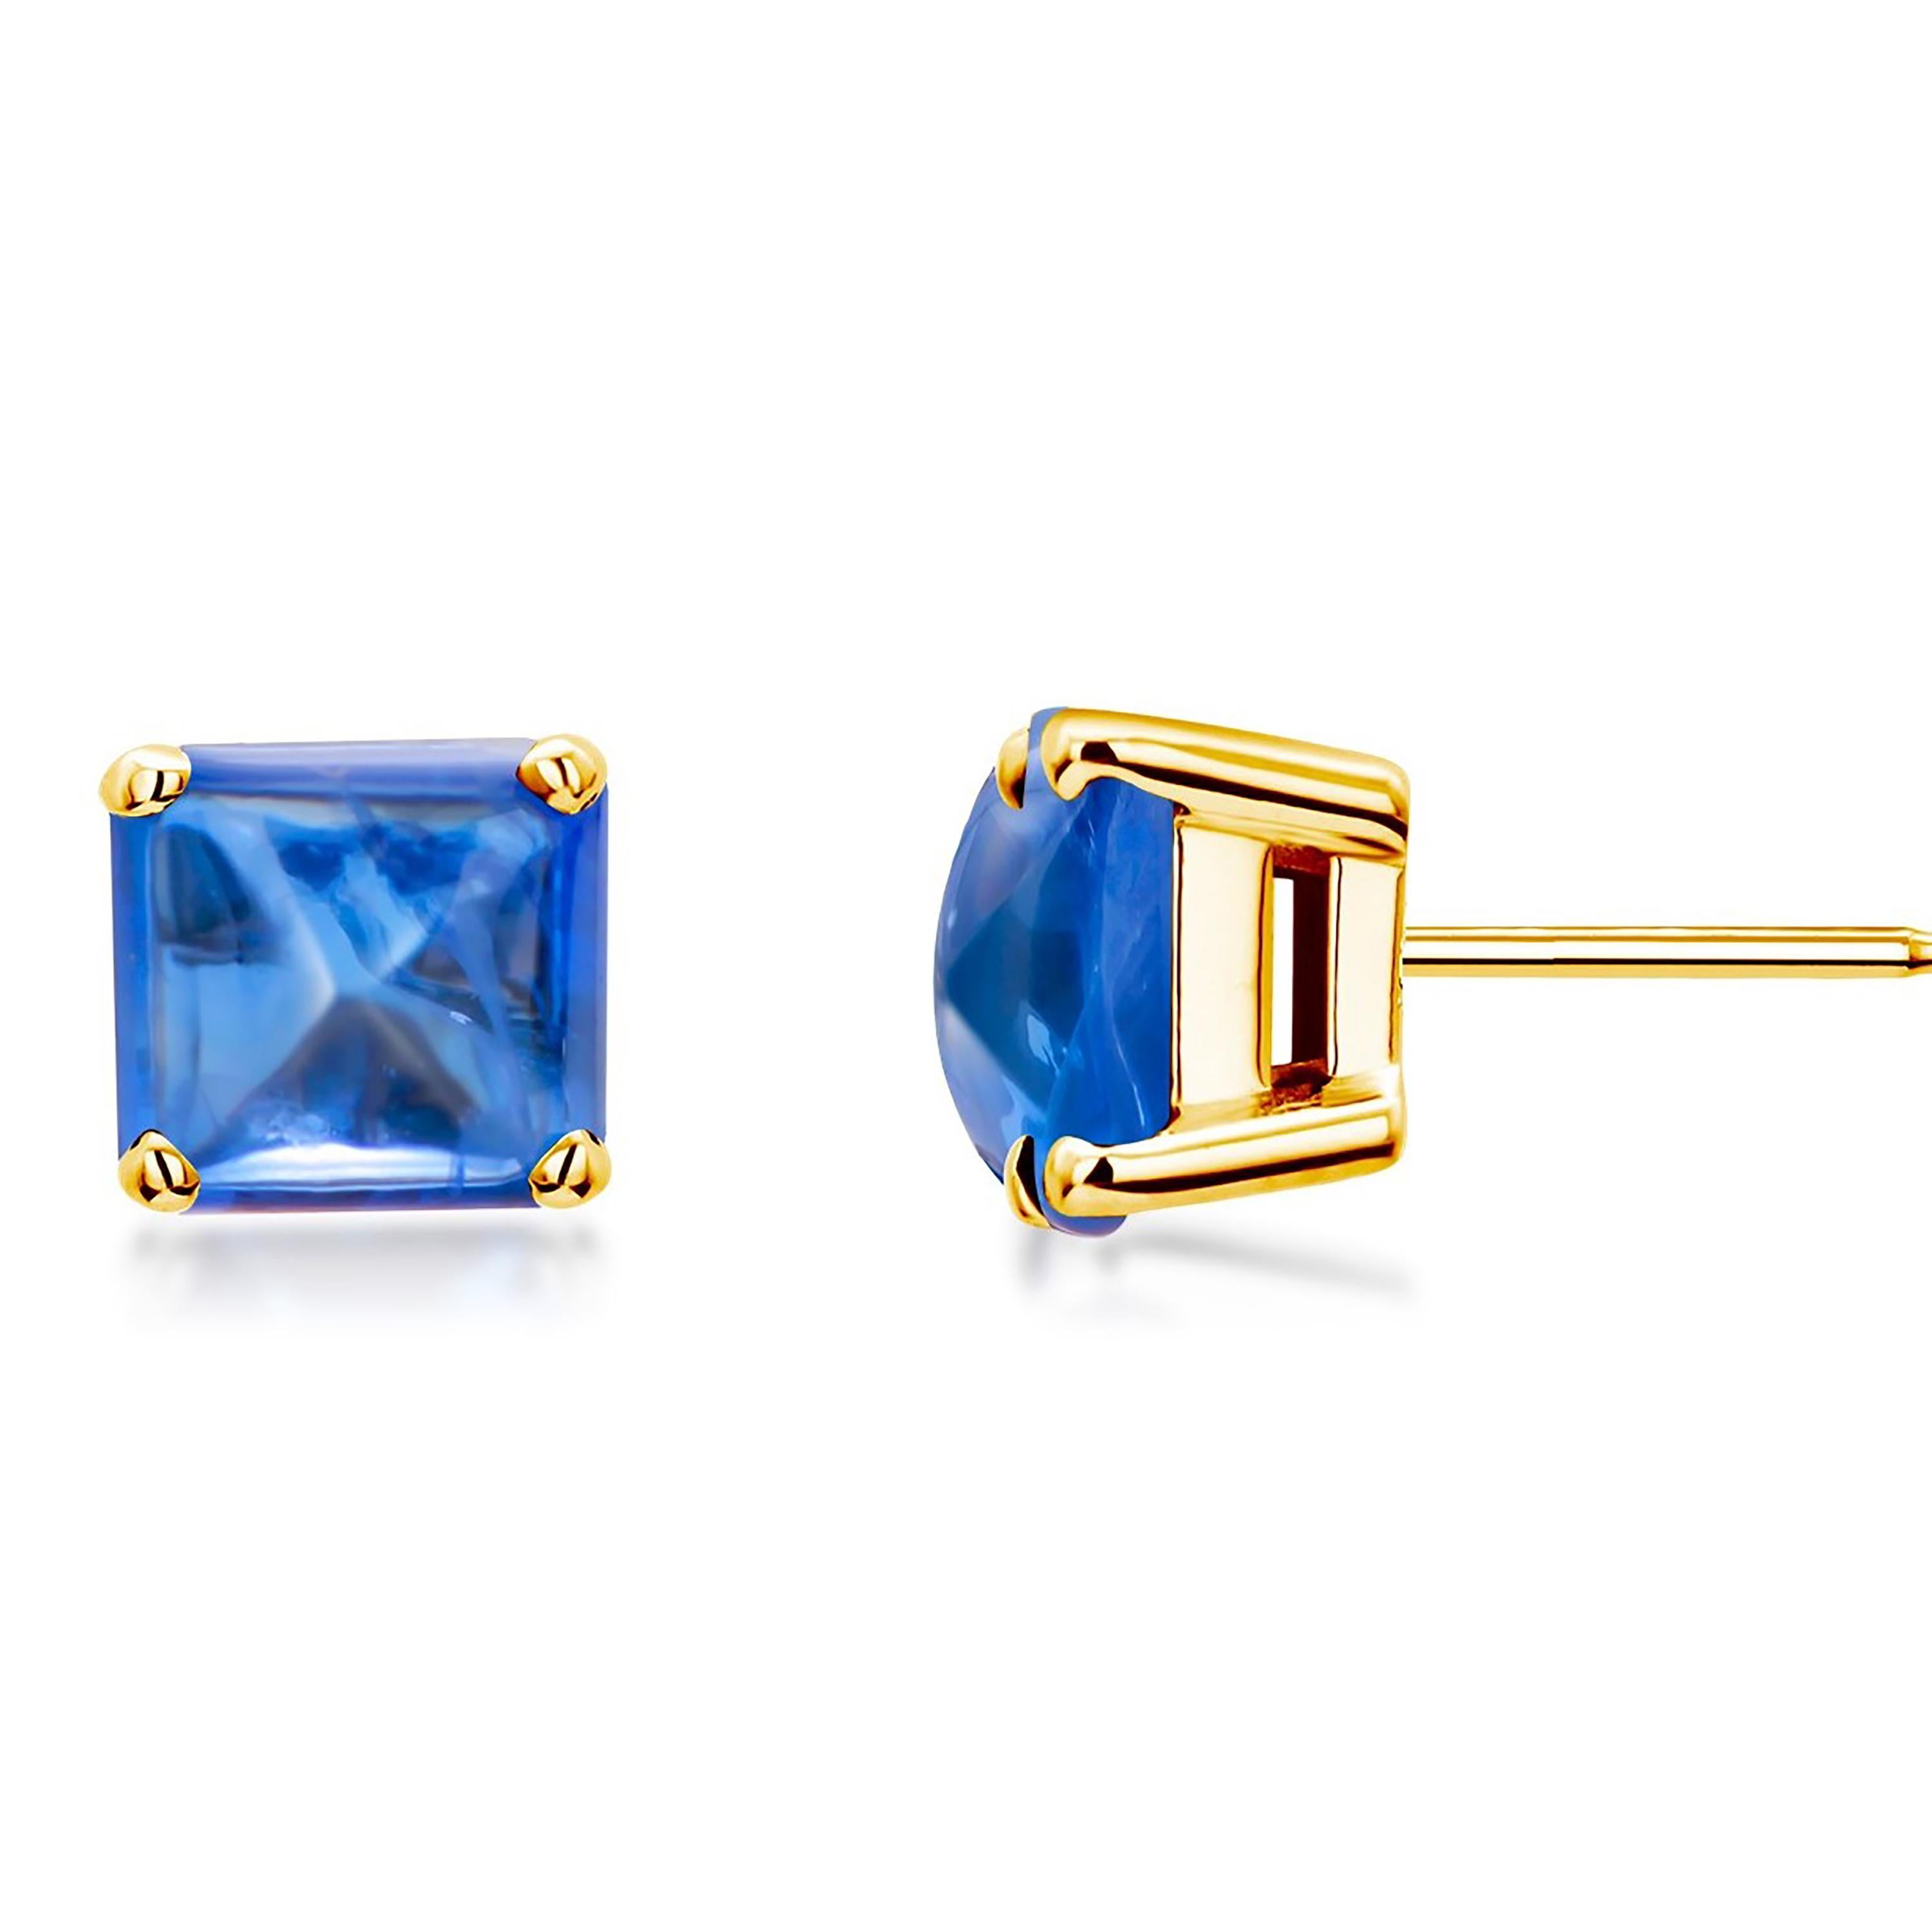 Contemporary Square Shaped Sugarloaf Ceylon Cabochon Sapphire 1.20 Carat Gold Stud Earrings